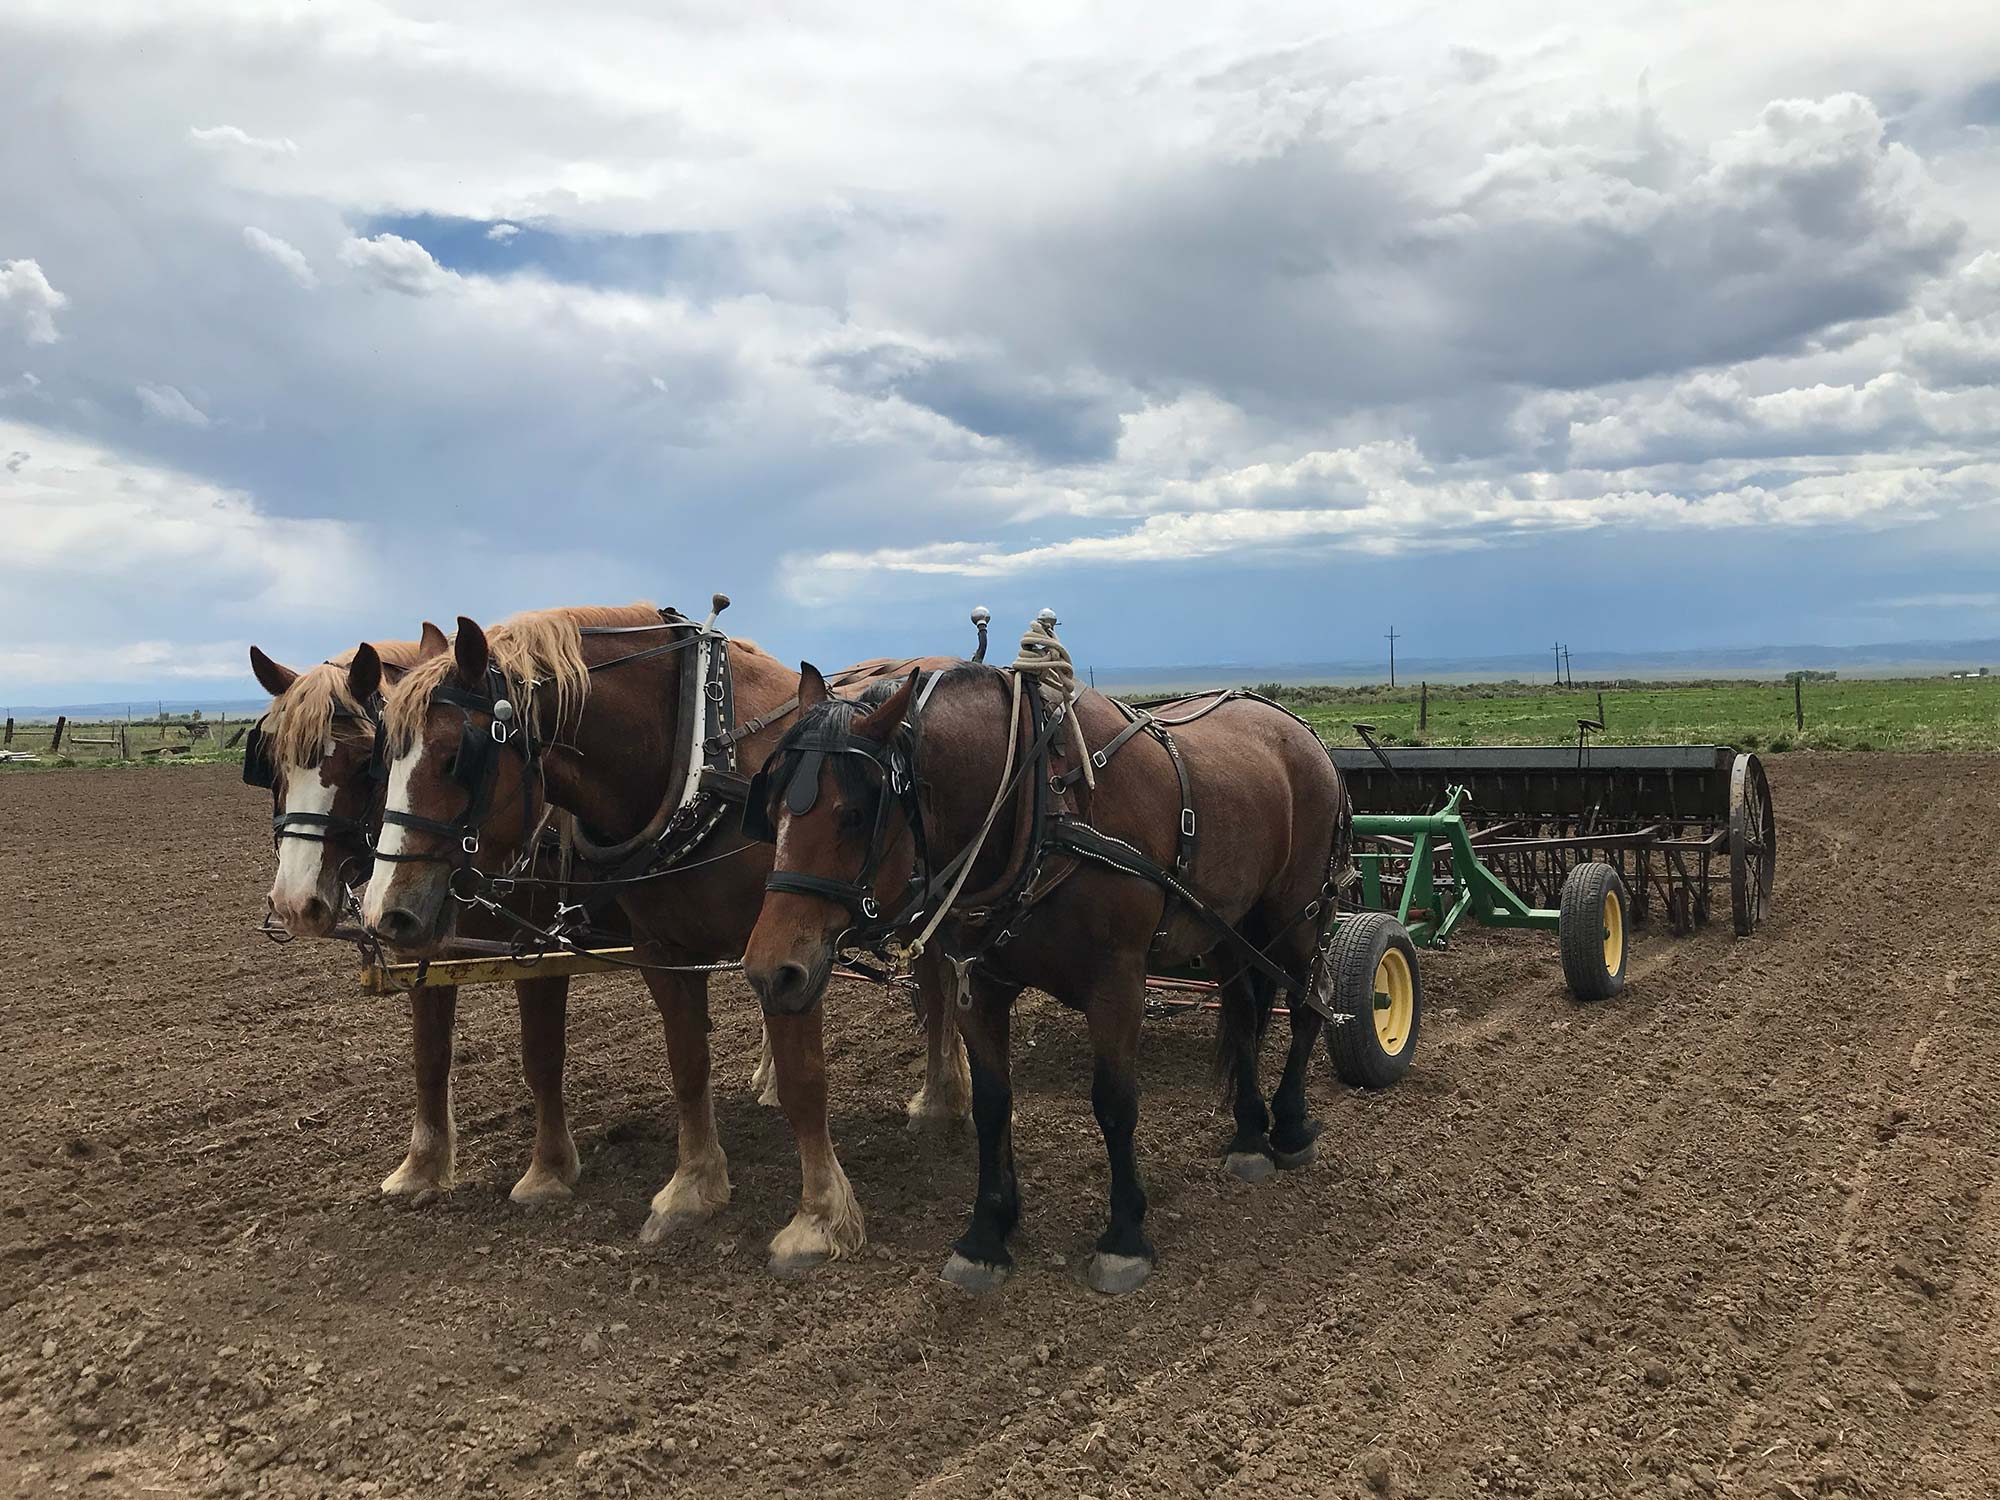 Grain Drill With Horses